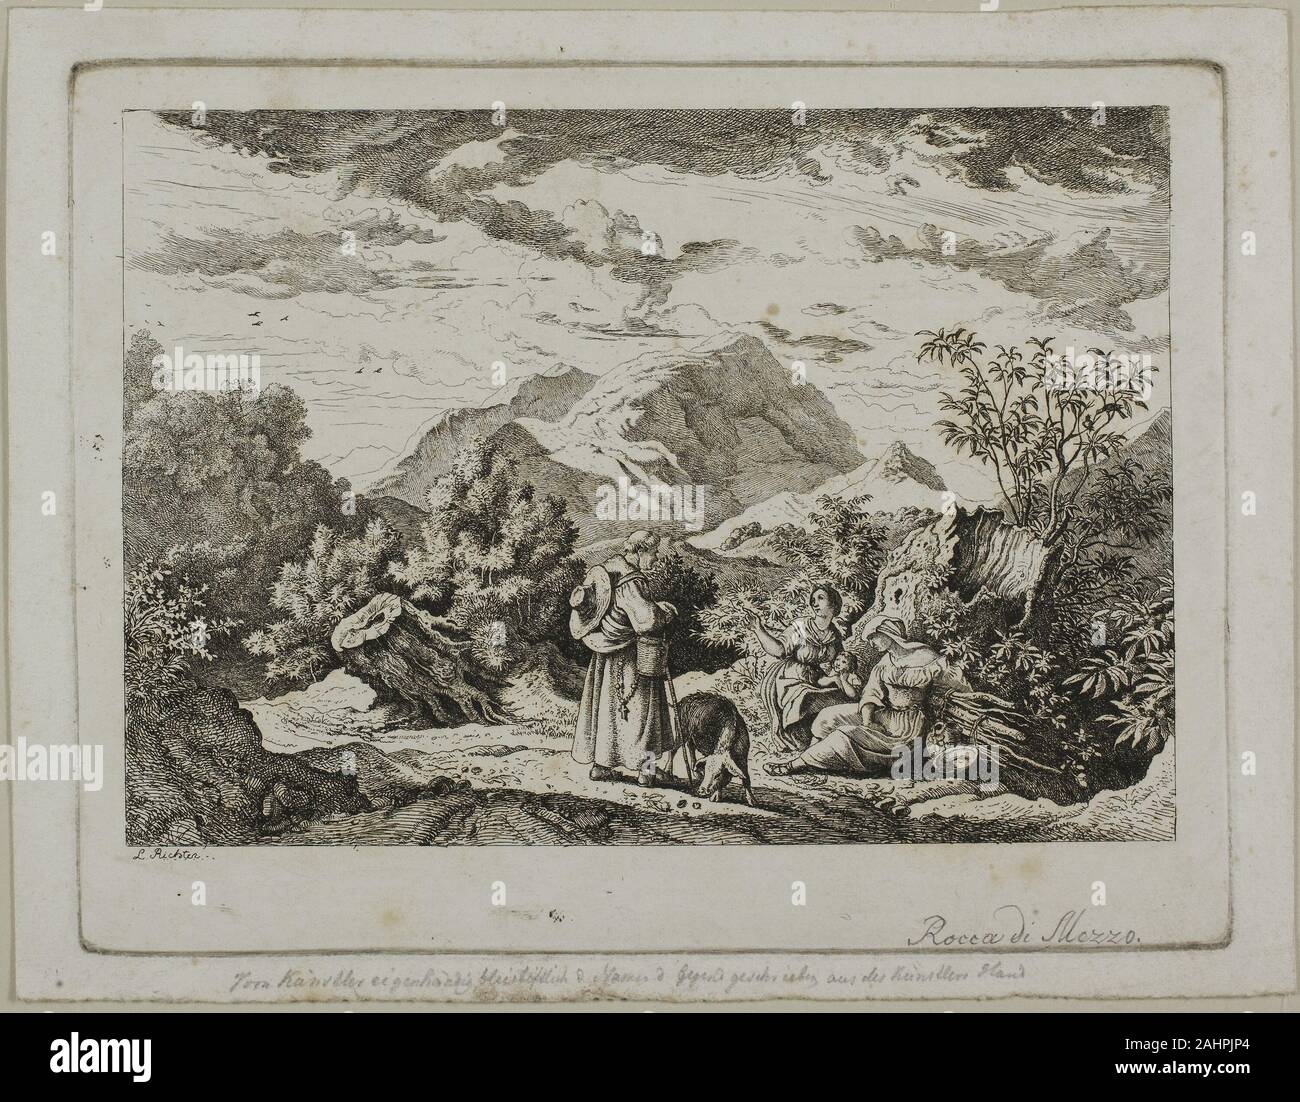 Adrian Ludwig (Ludwig) Richter. Rocca di Mezzo. 1832. Germany. Etching on paper Stock Photo